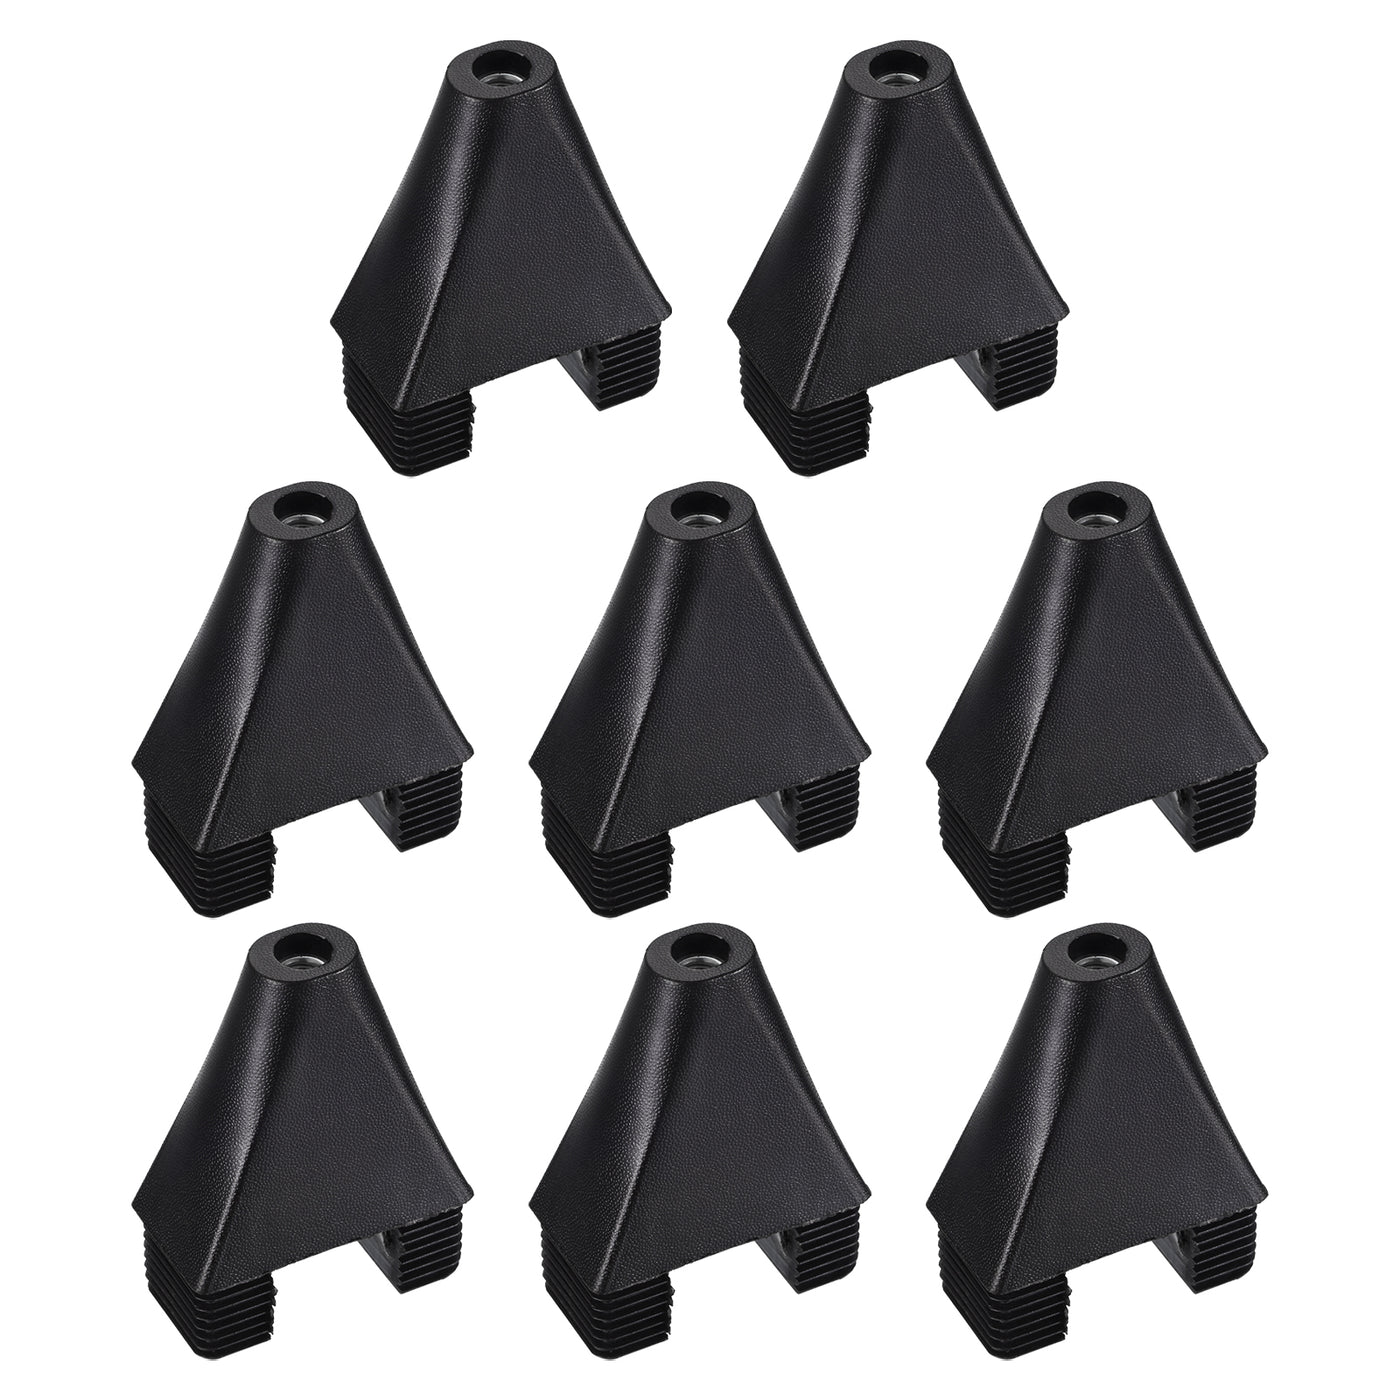 uxcell Uxcell 8Pcs 2.36"x1.18" Caster Insert with Thread, M8 Thread for Furniture